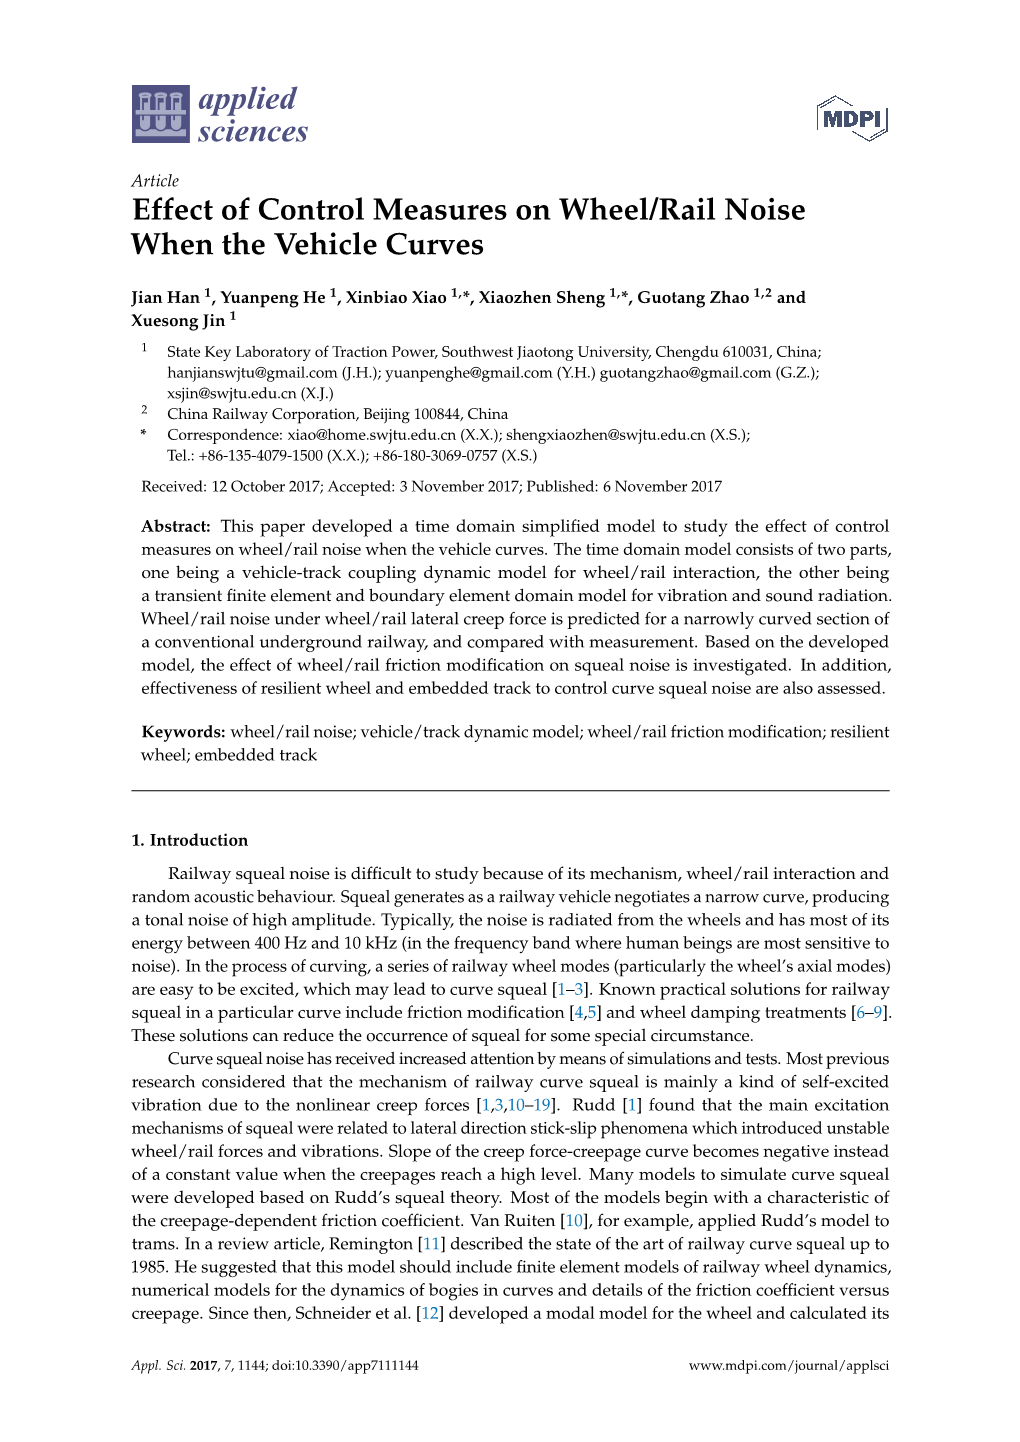 Effect of Control Measures on Wheel/Rail Noise When the Vehicle Curves